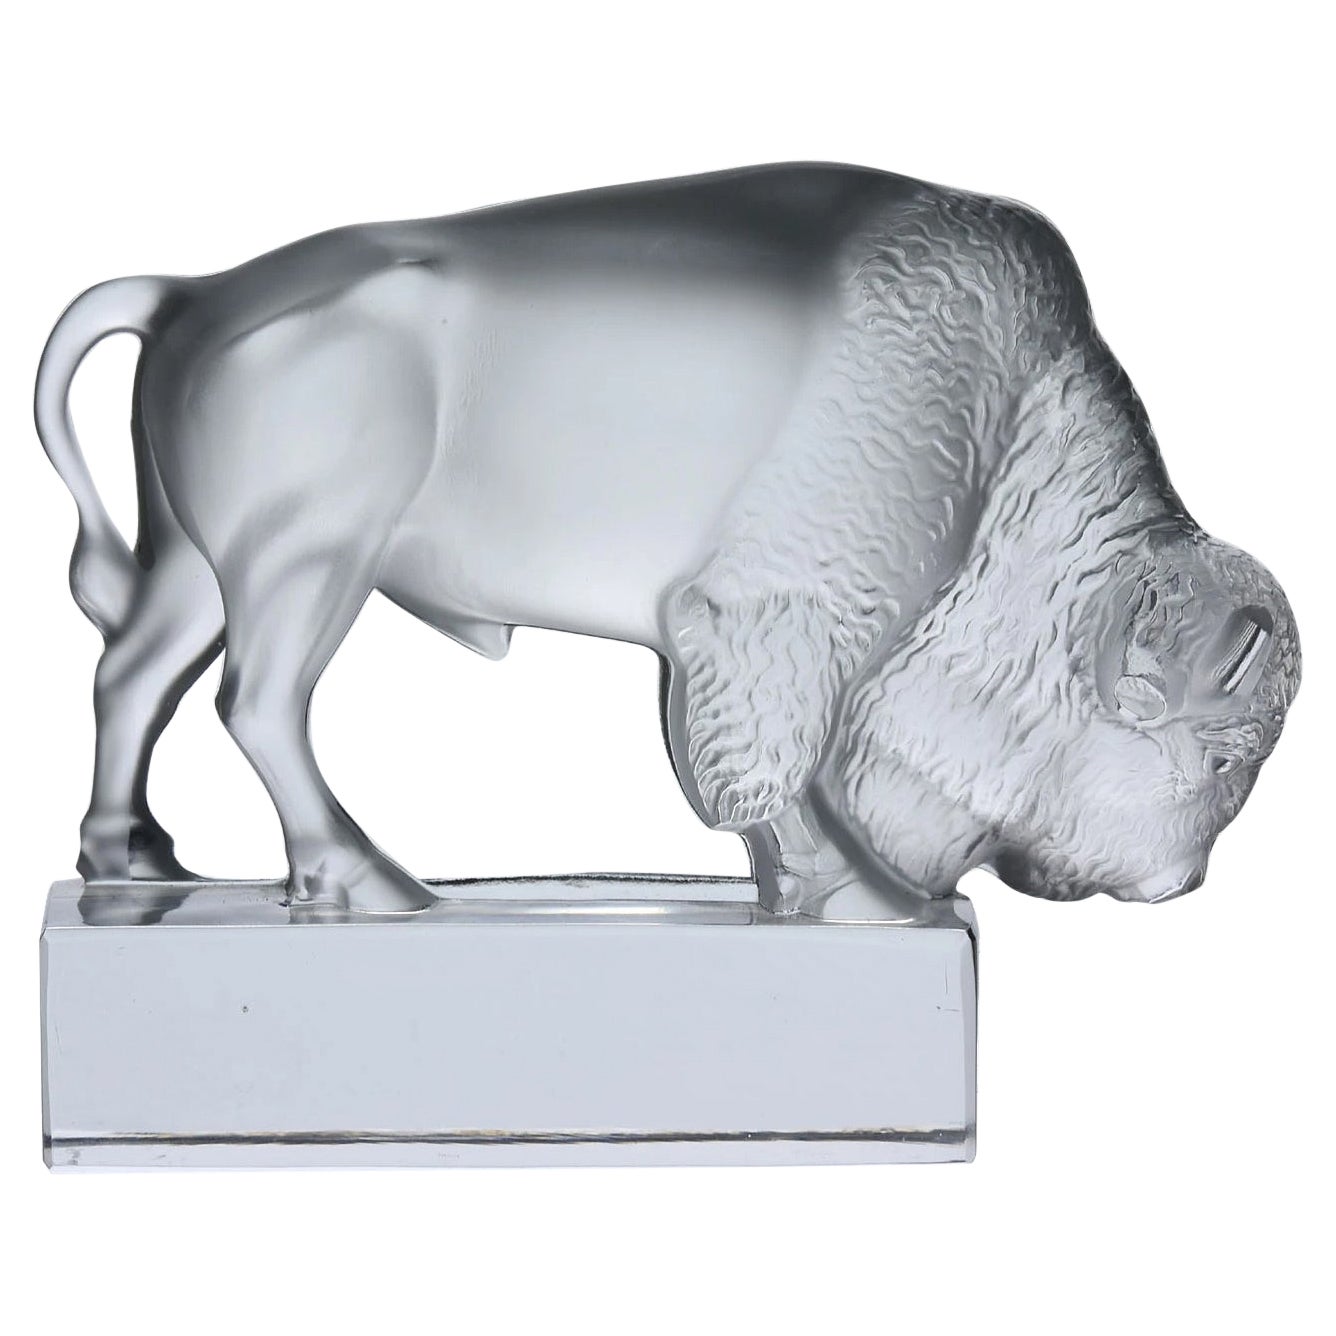 20th Century Clear Glass Sculpture Entitled "Bison Paperweight" by Lalique Glass